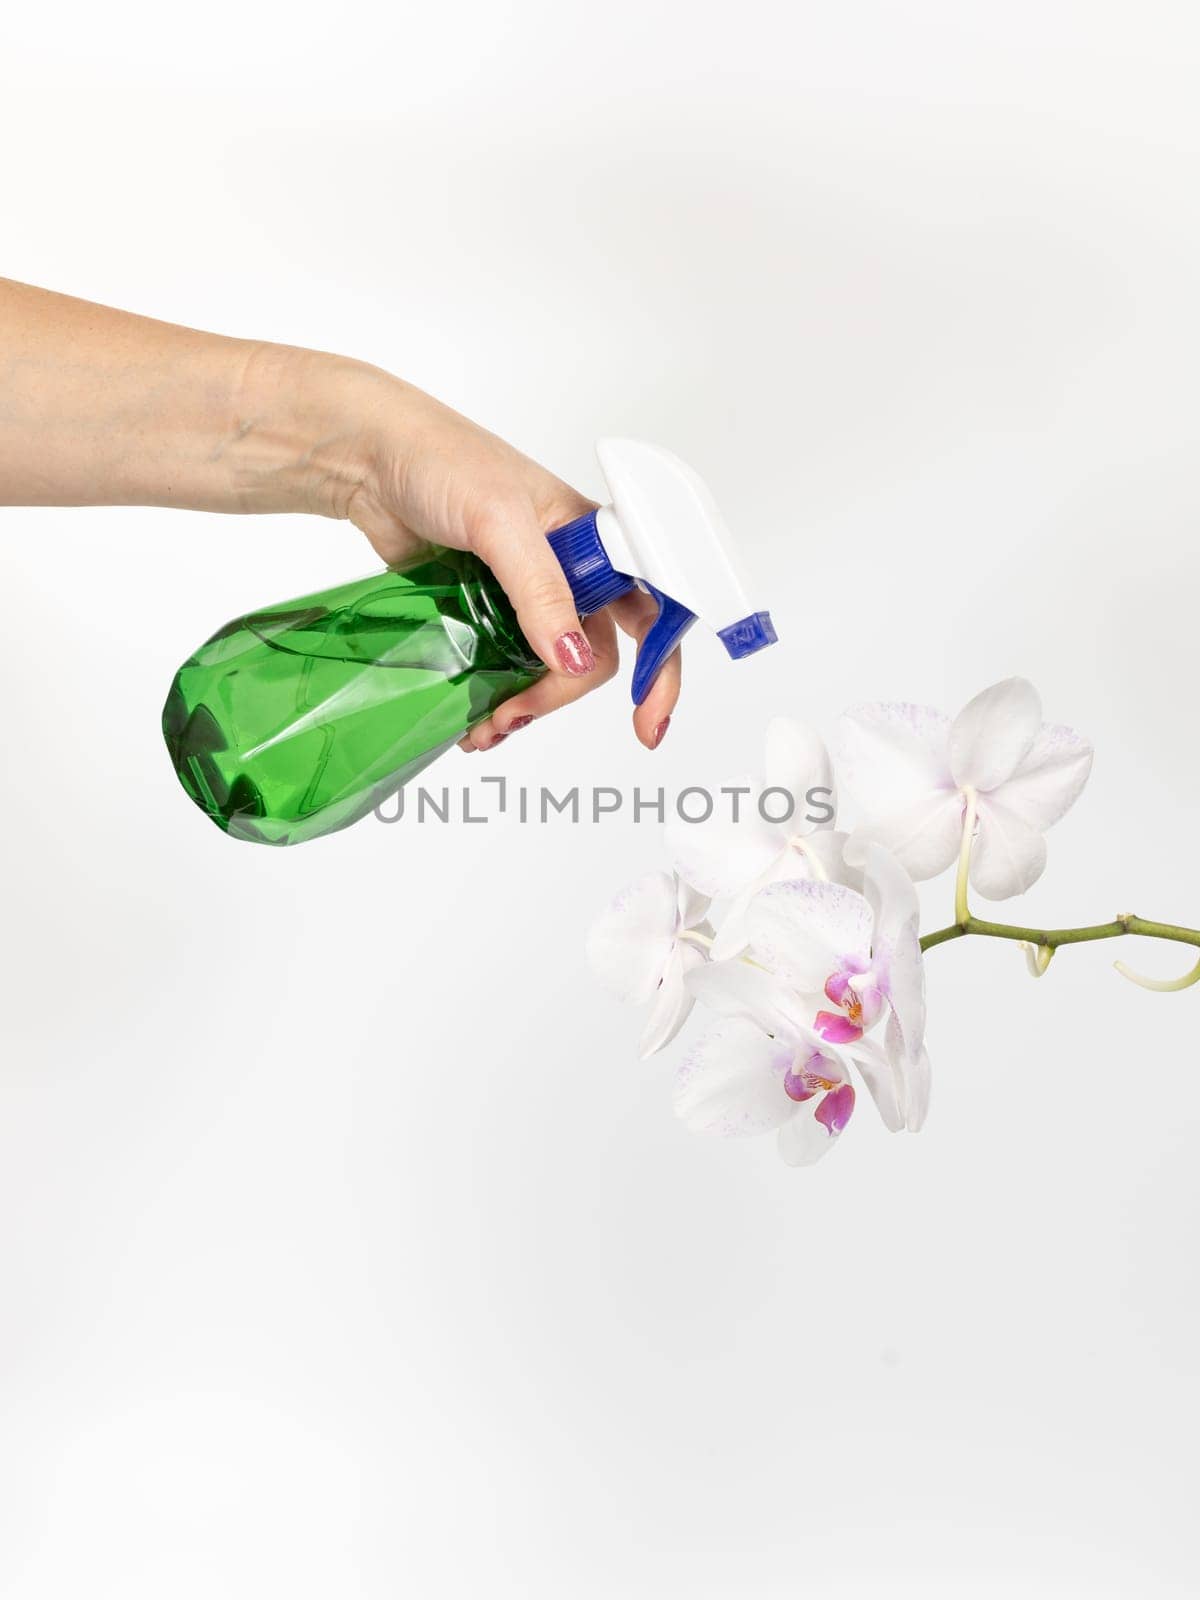 Woman with a sprayer and white orchid flowers on the white background.